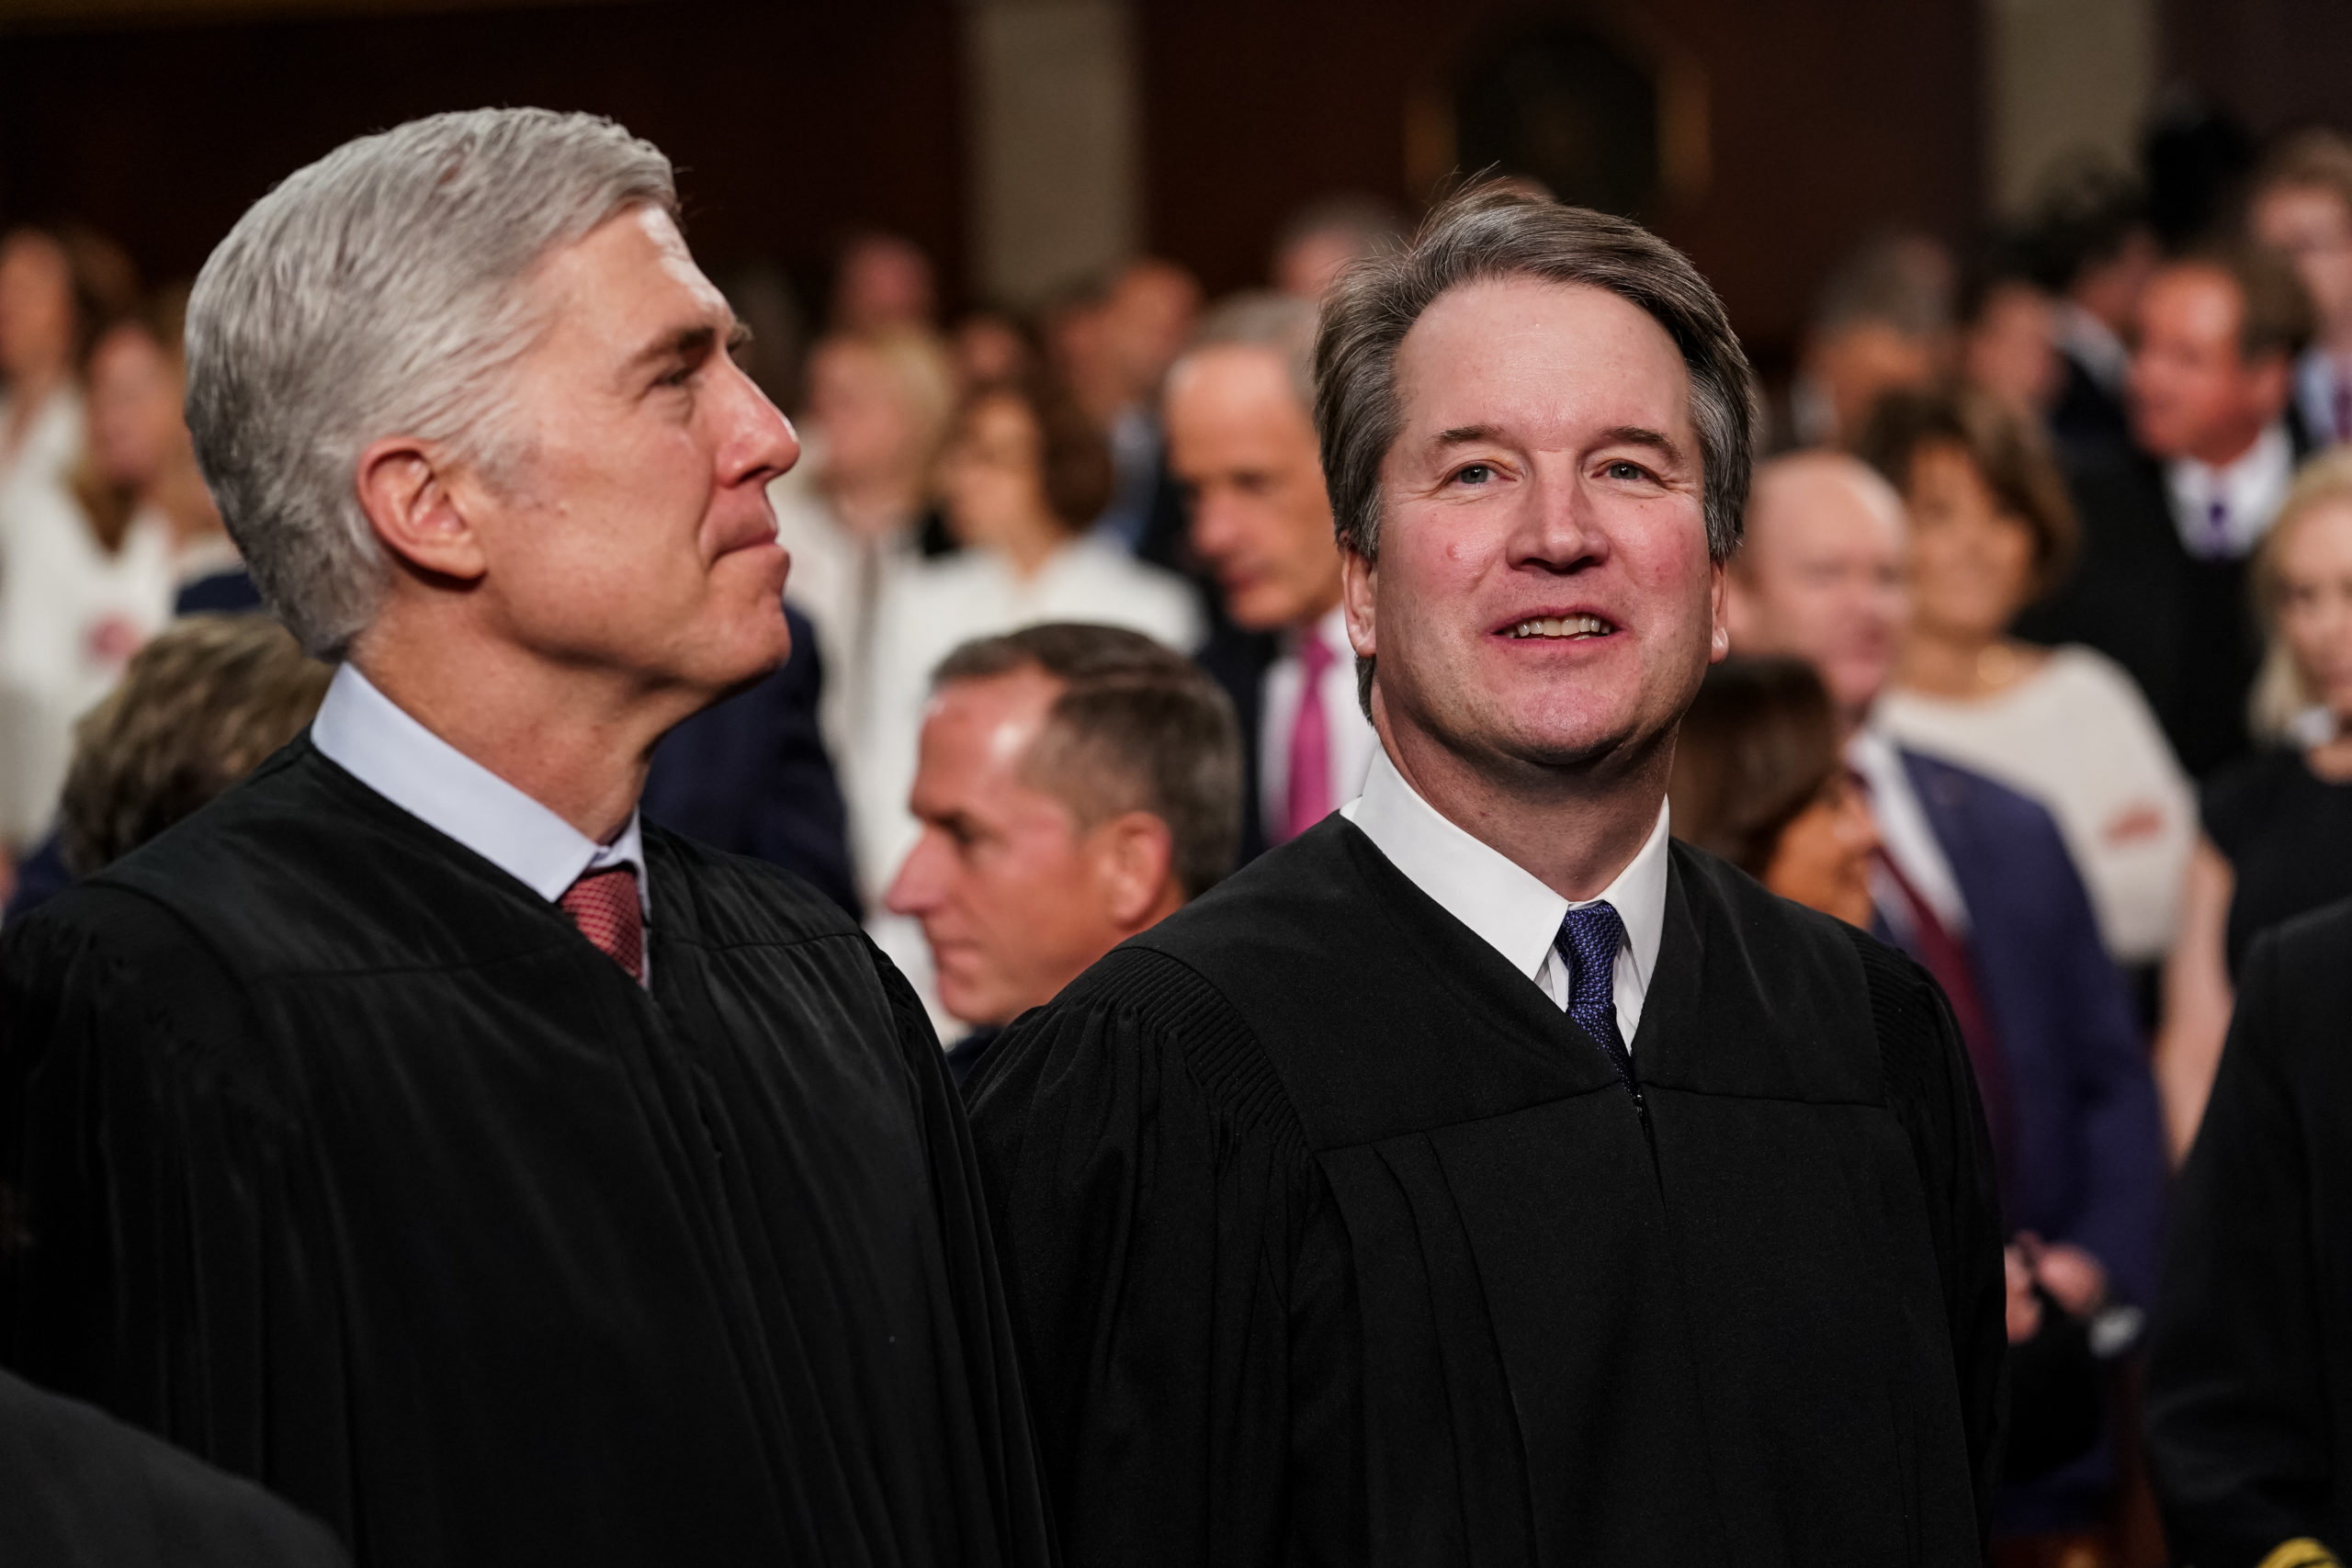 Supreme Court Justices Neil Gorsuch and Brett Kavanaugh attend the State of the Union address on Feb. 5, 2019 in Washington, D.C. (Doug Mills-Pool/Getty Images)